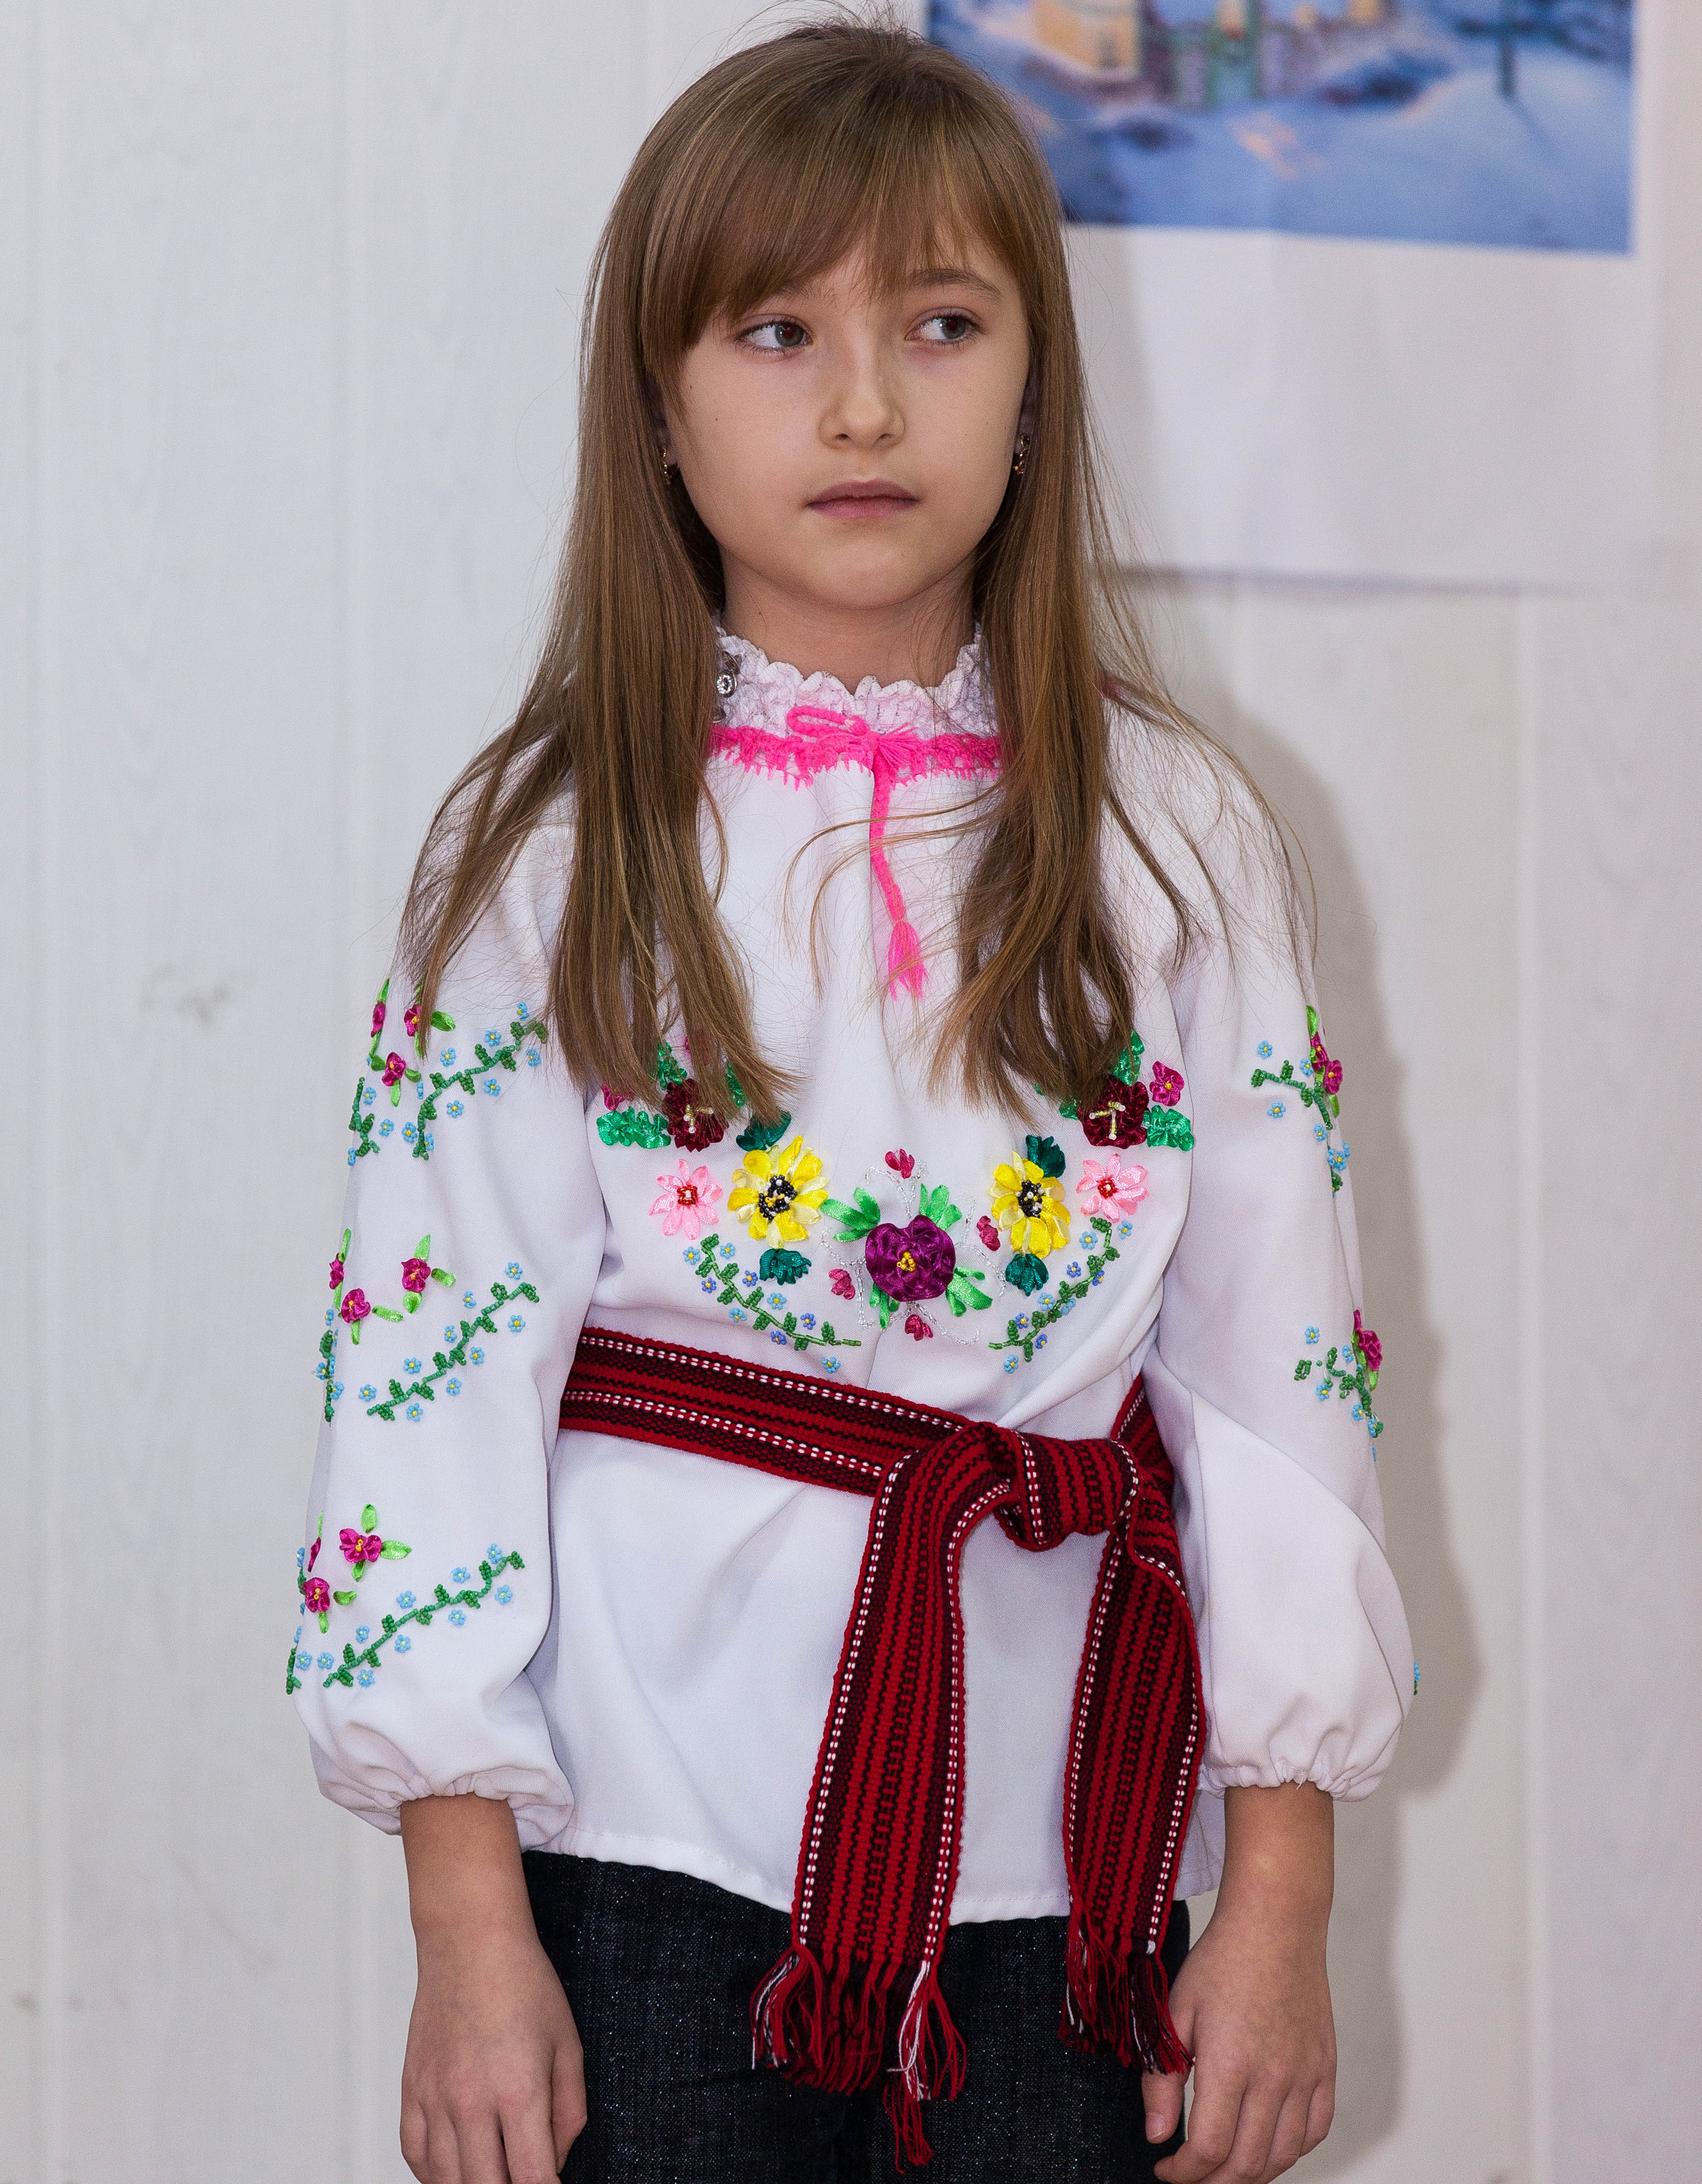 a young fair-haired schoolgirl photographed in December 2013